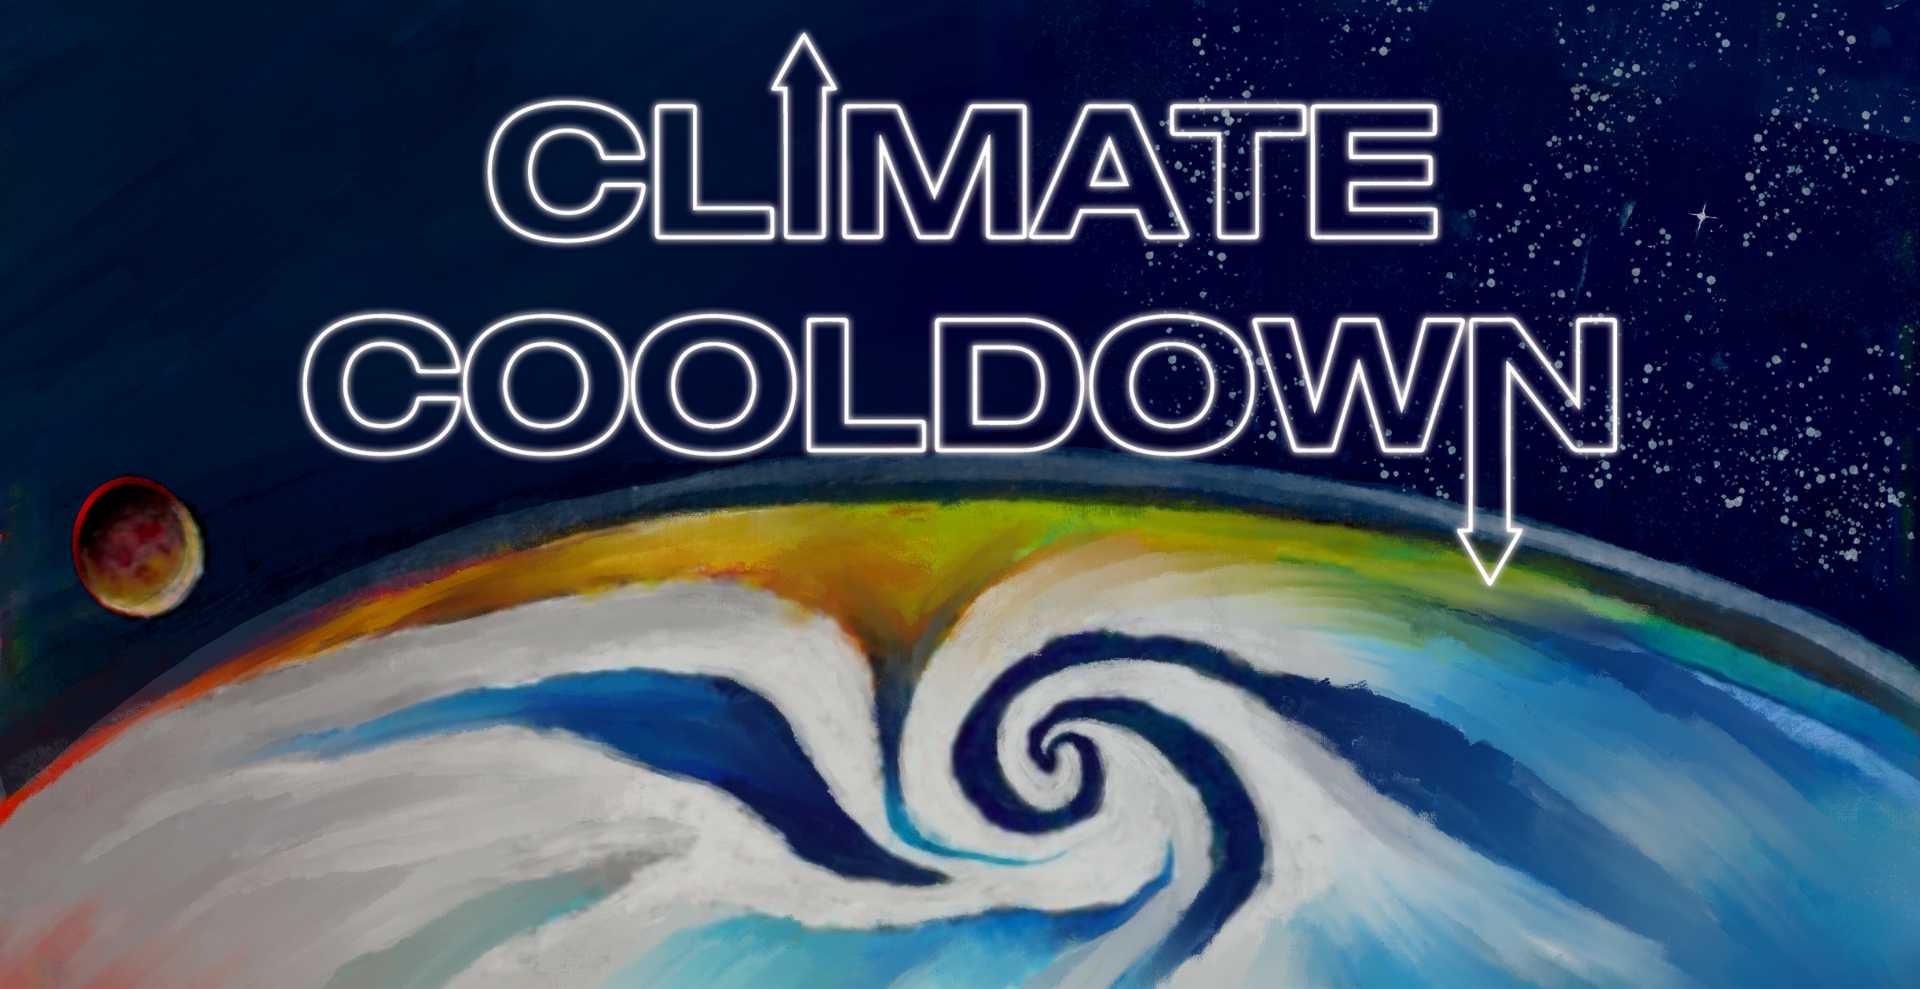 Load video: Climate Cooldown Trailer